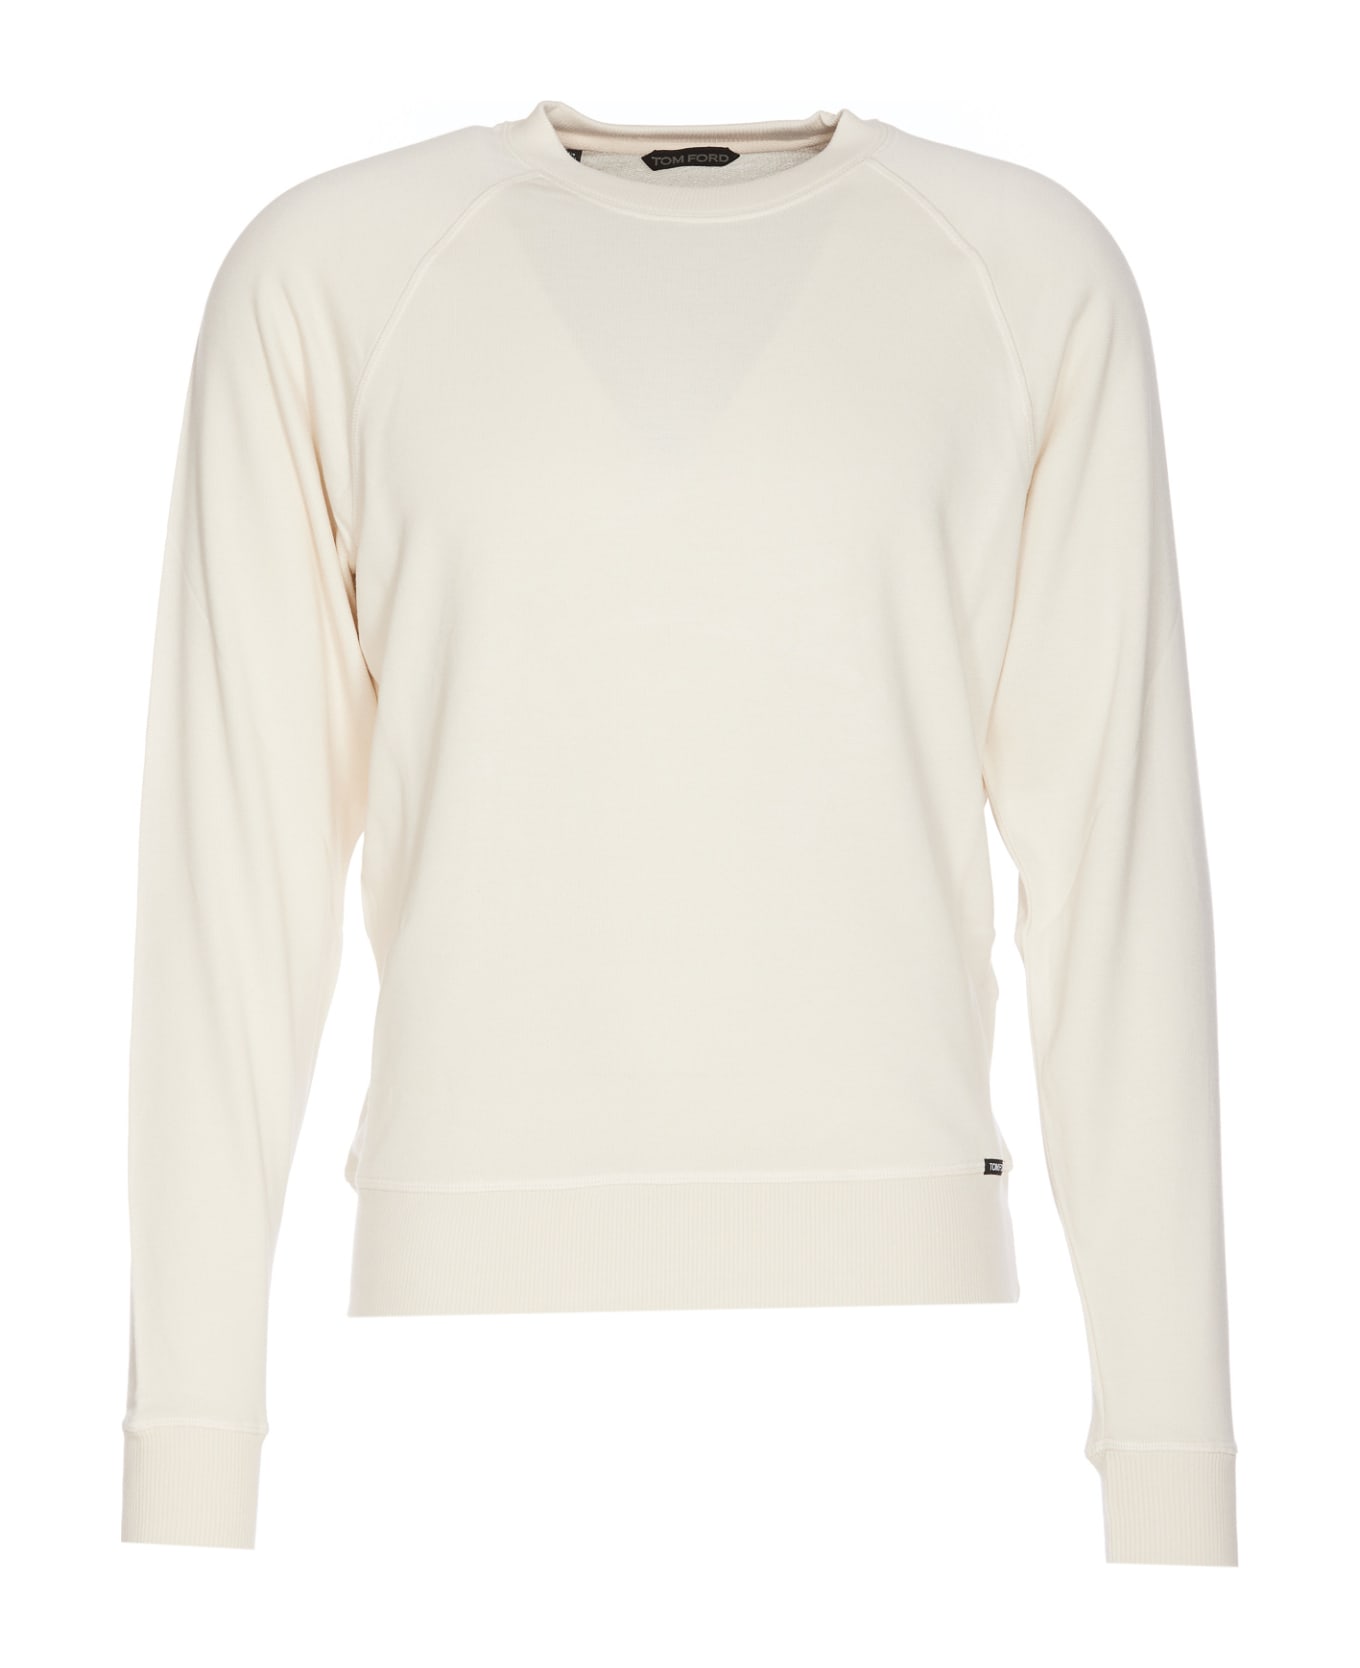 Tom Ford Sweater - White